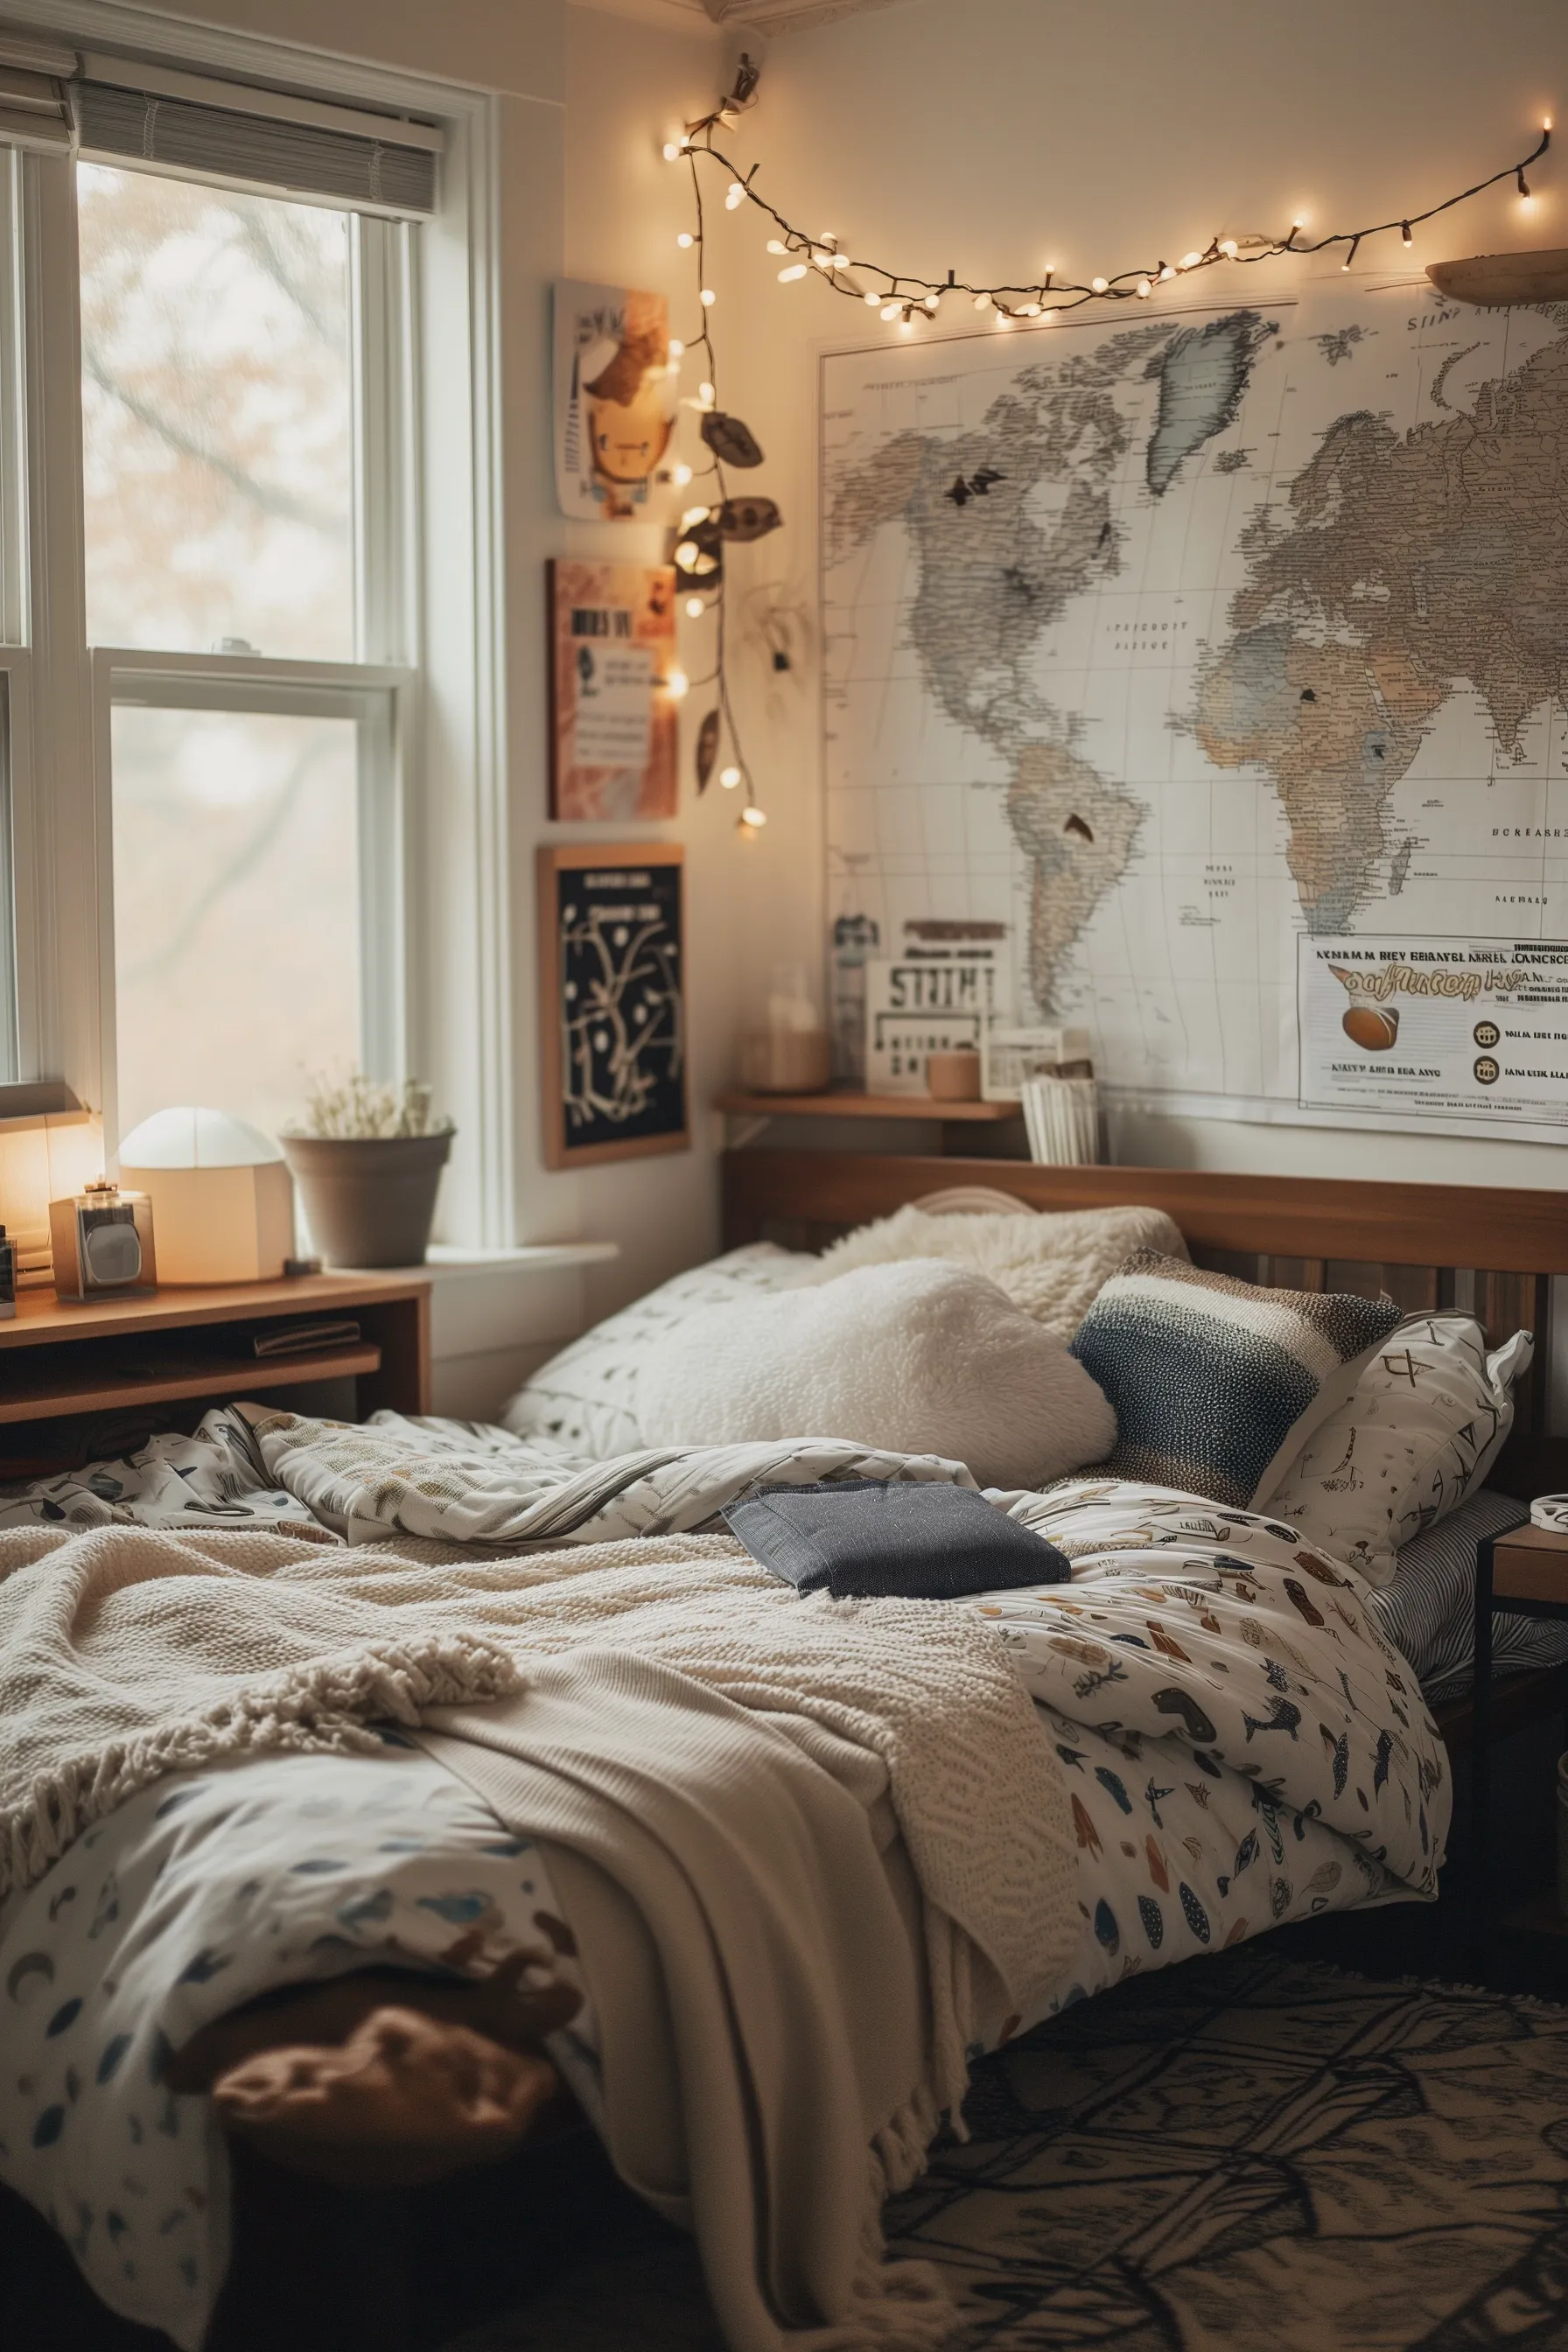 A dorm bedroom with a map poster